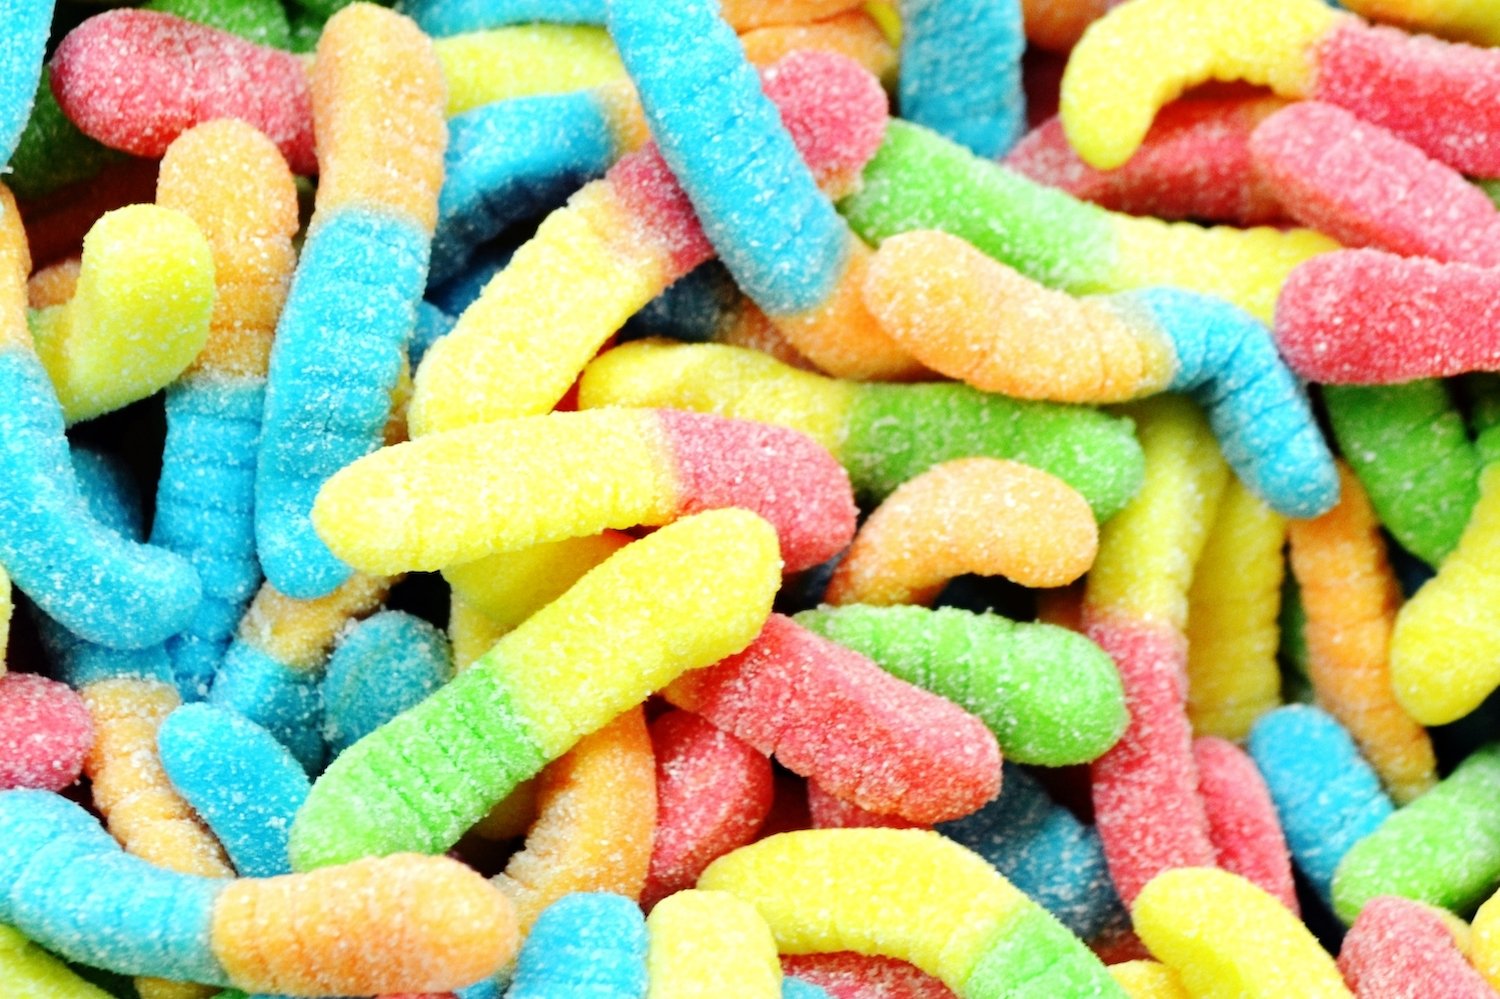 bright-colorful-gummy-worms-candy-sweets-RN4CL3D